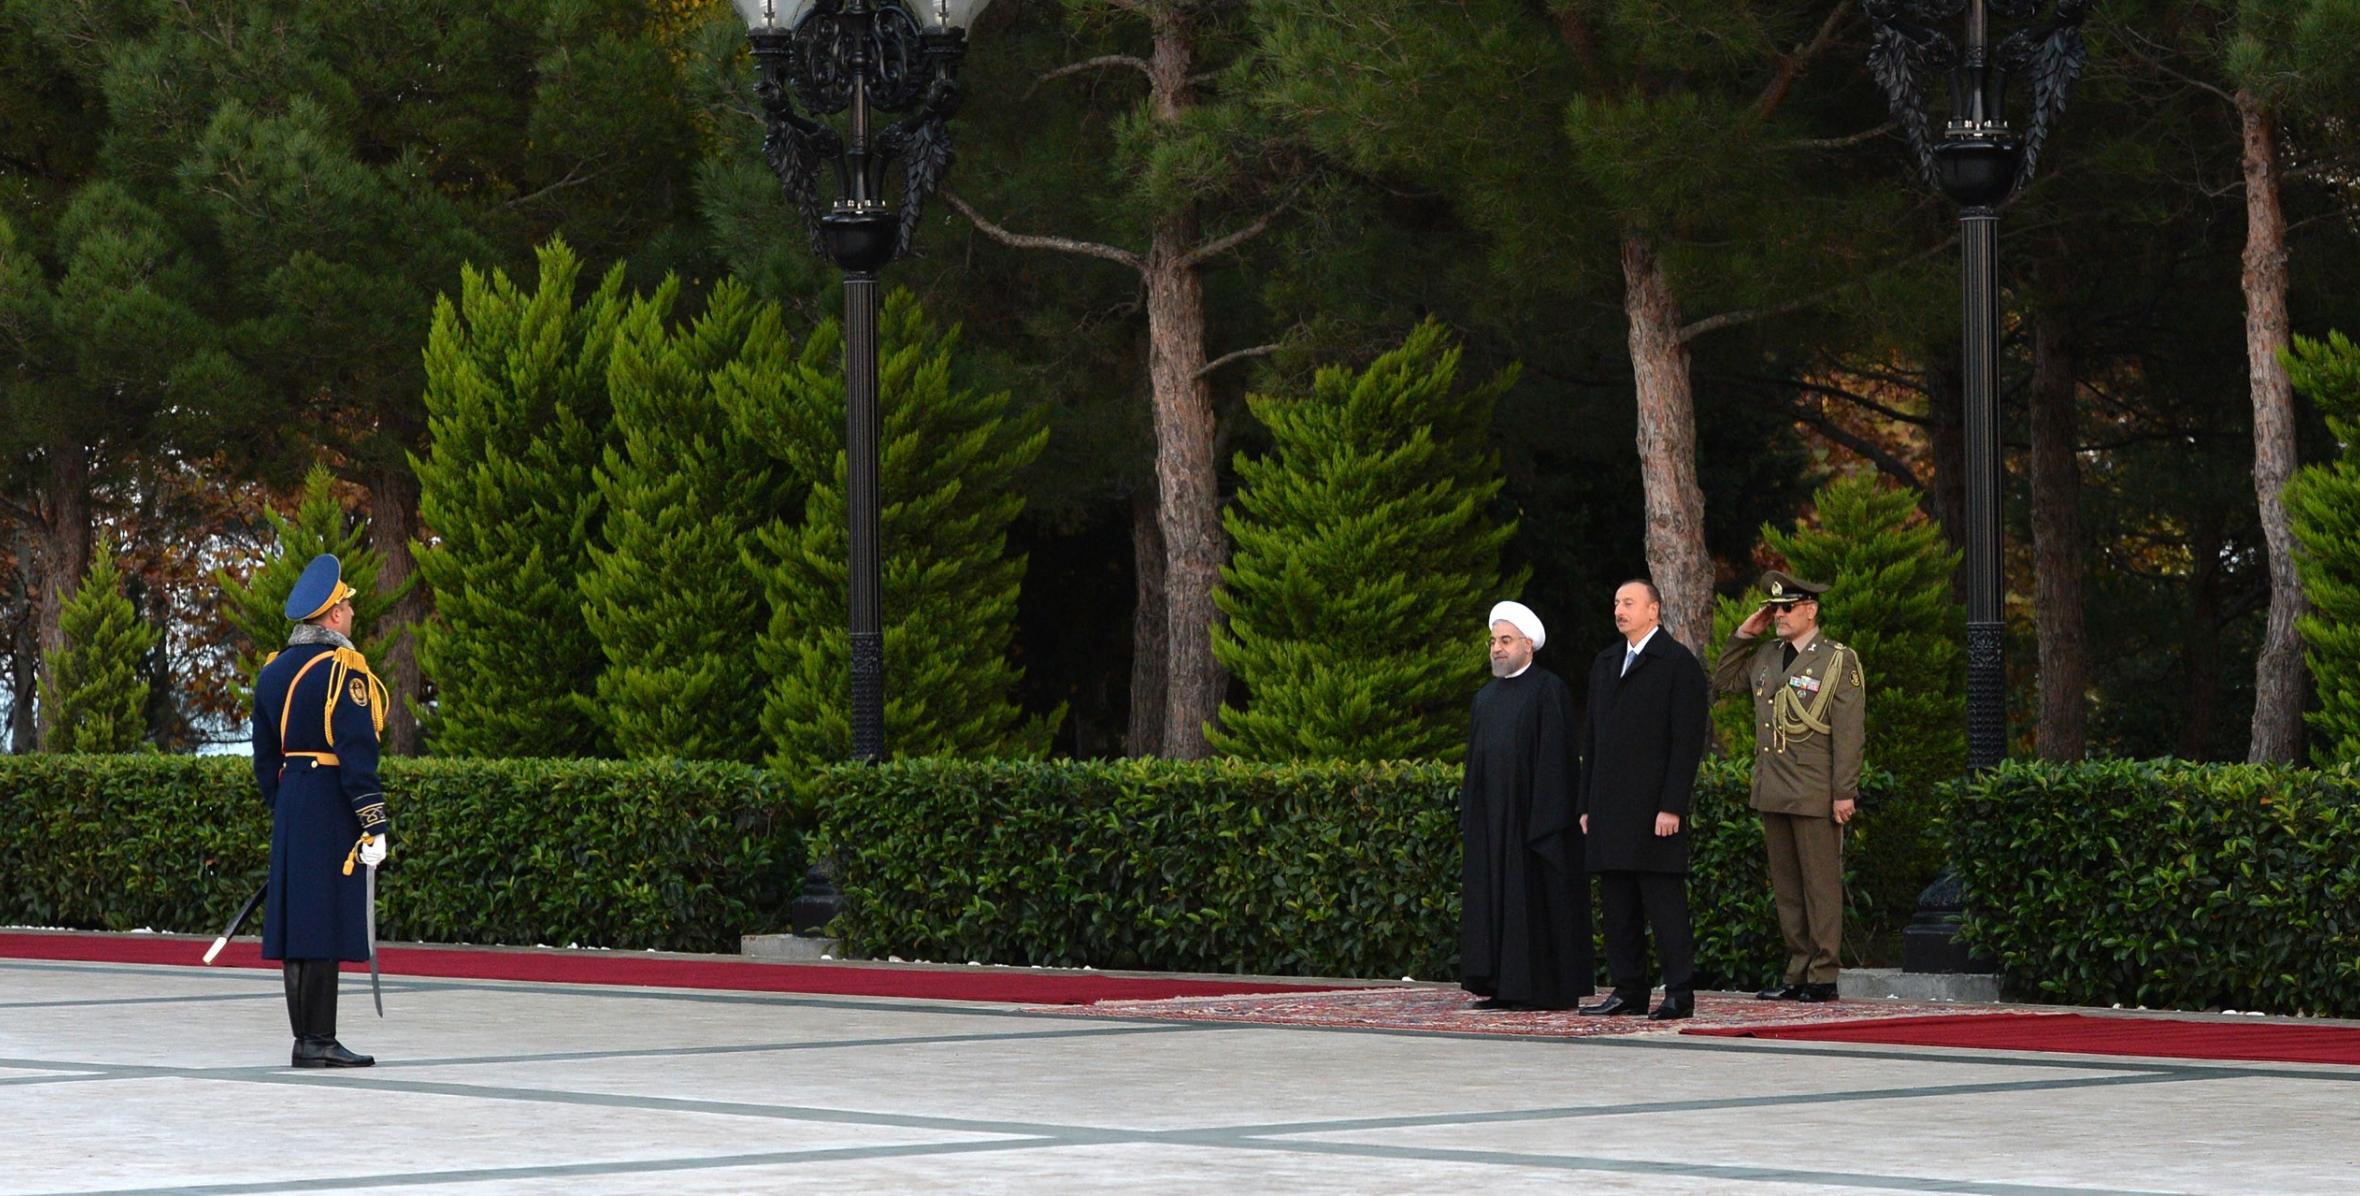 Official welcoming ceremony for Iranian President Hassan Rouhani was held